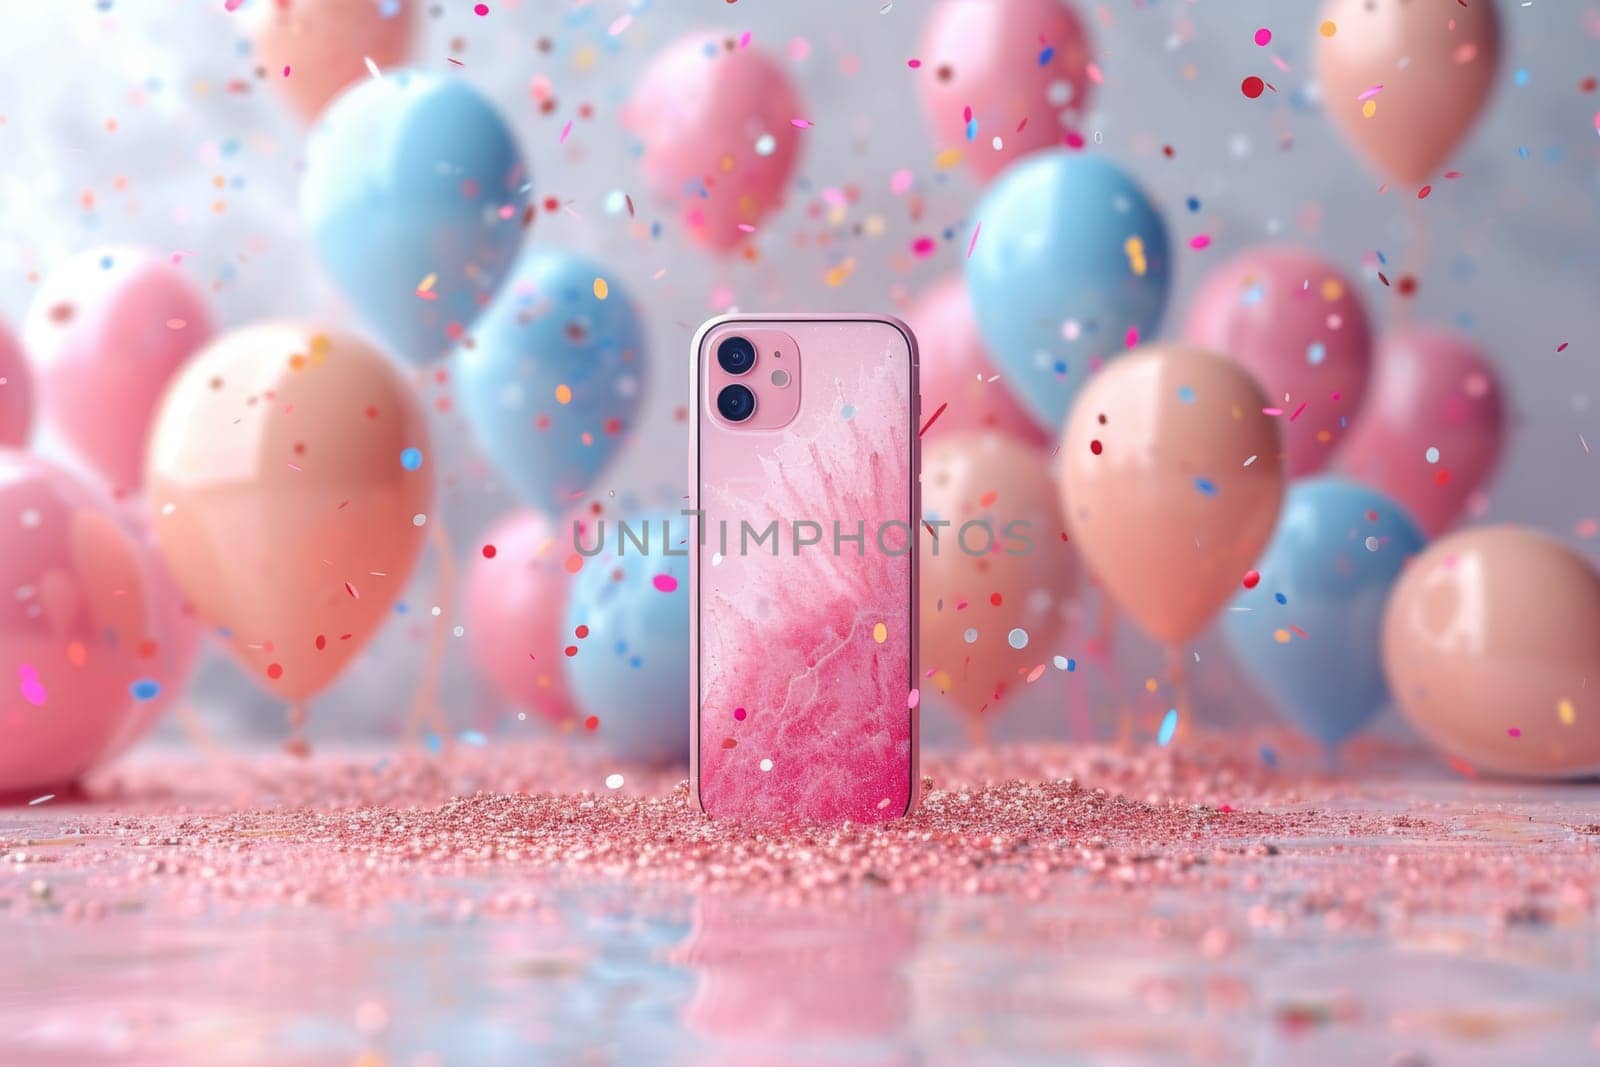 Smartphone on the background of festive balloons and confetti . The concept of shopping and holidays.